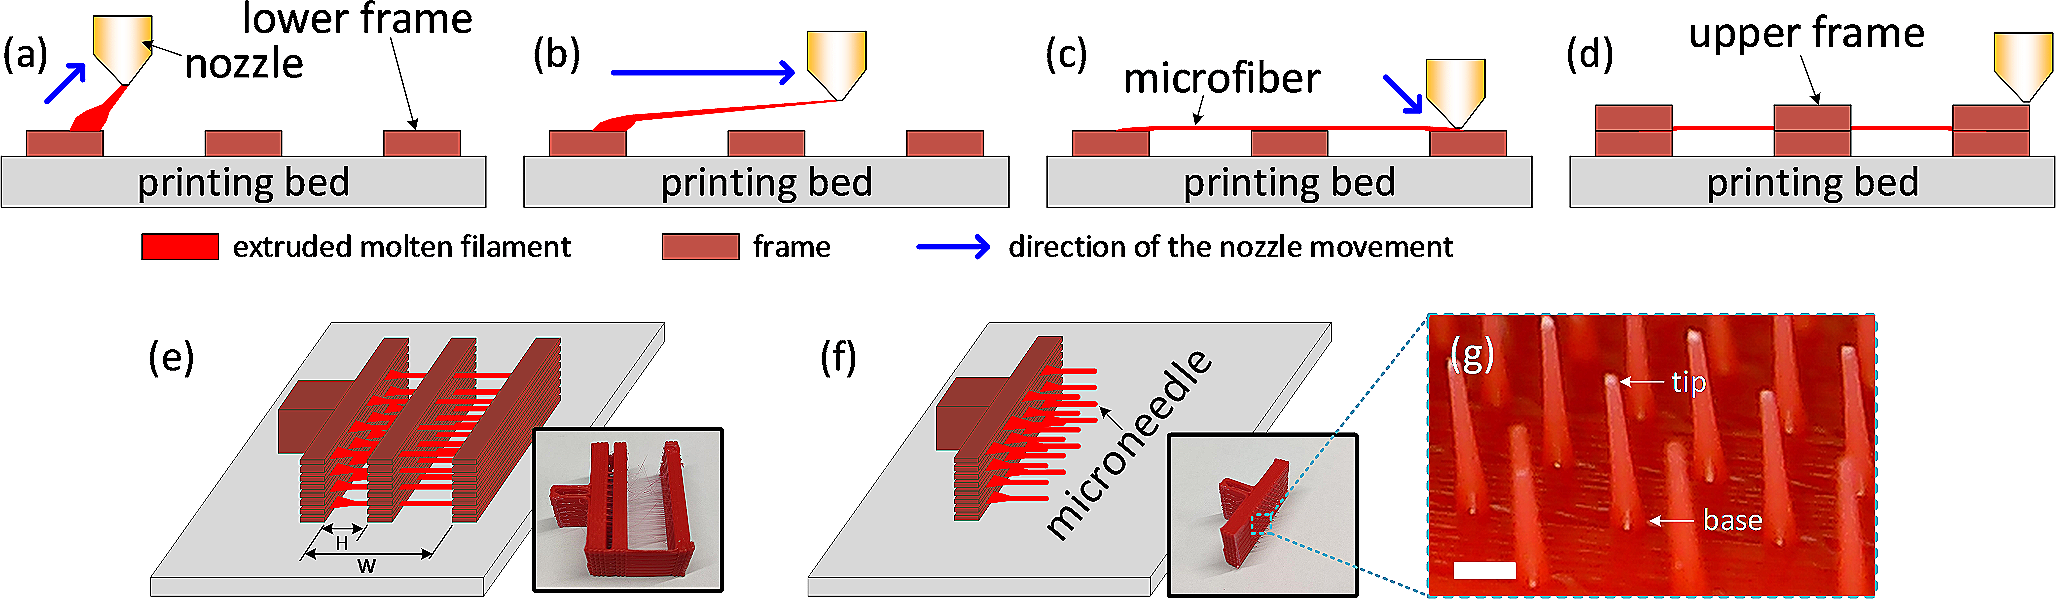 3D printing redefines microneedle fabrication for transdermal drug delivery